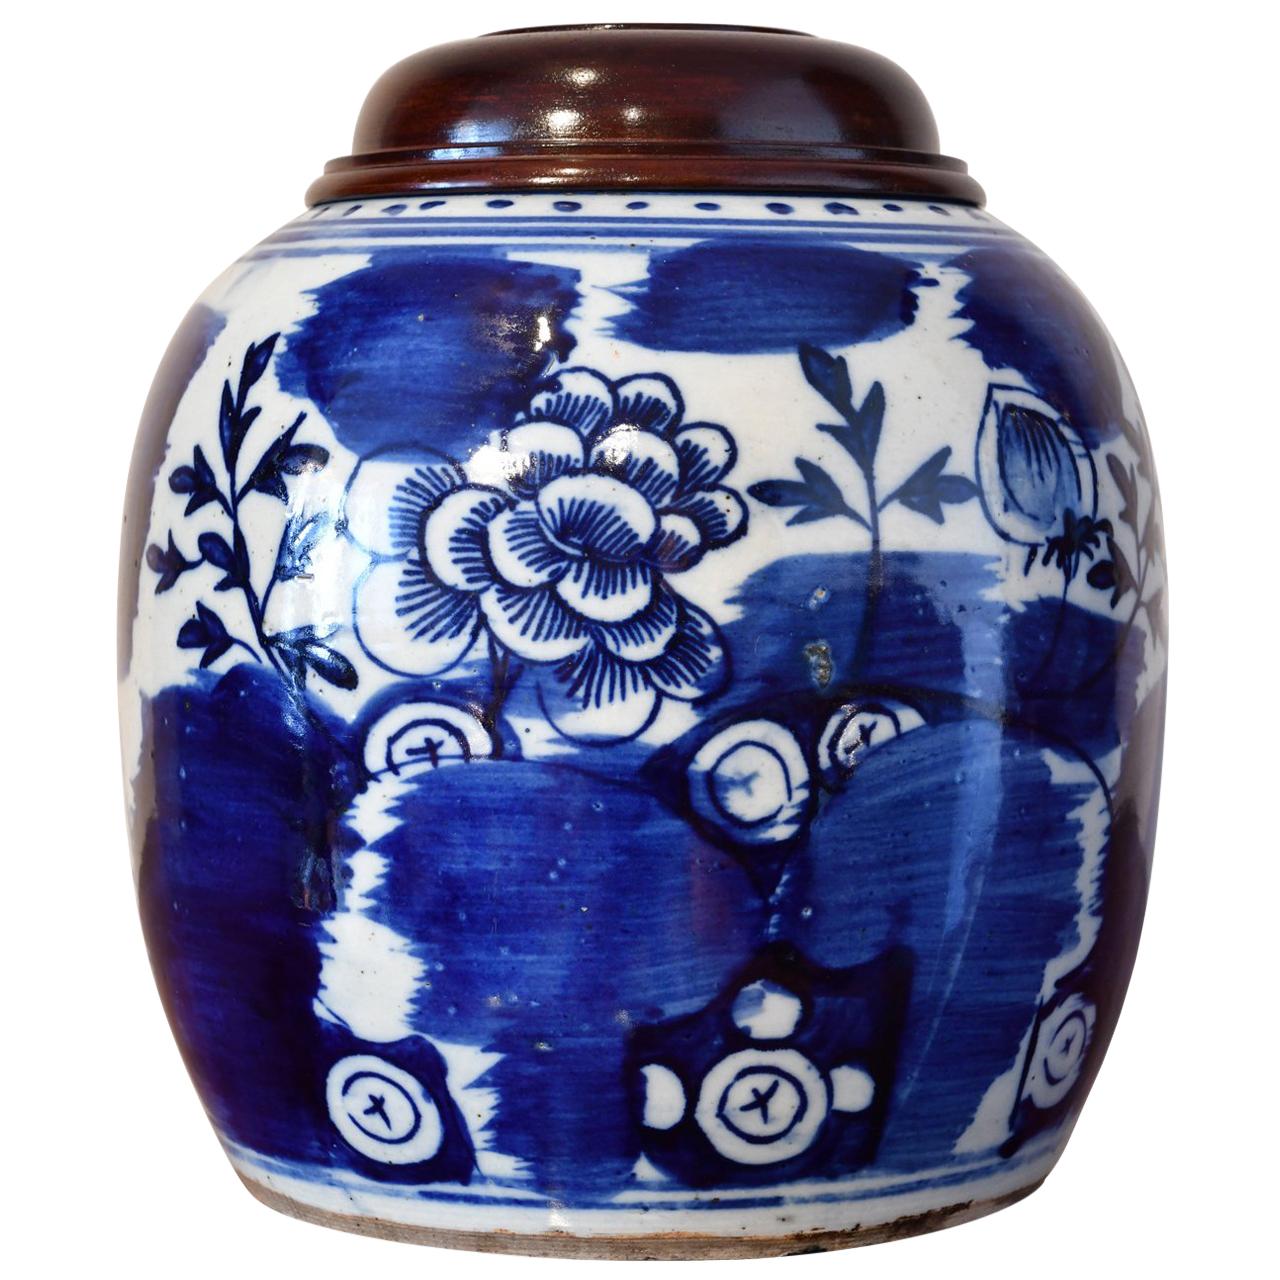 18th Century Qing Chinese Porcelain Cobalt Blue and White Jar with Peony